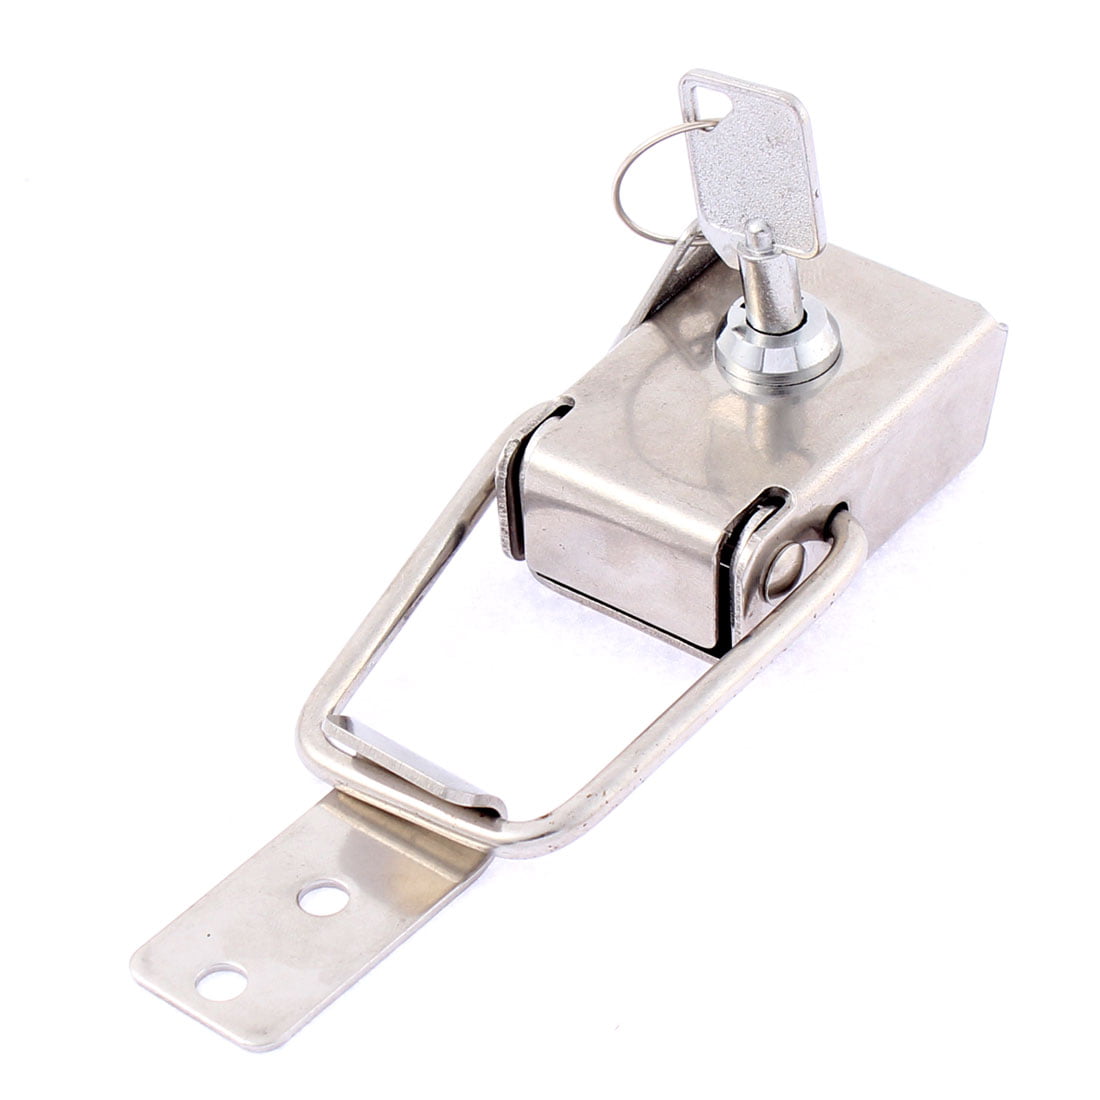 Stainless Steel Security Locking Toggle Latch Catch Hasp w Keys 